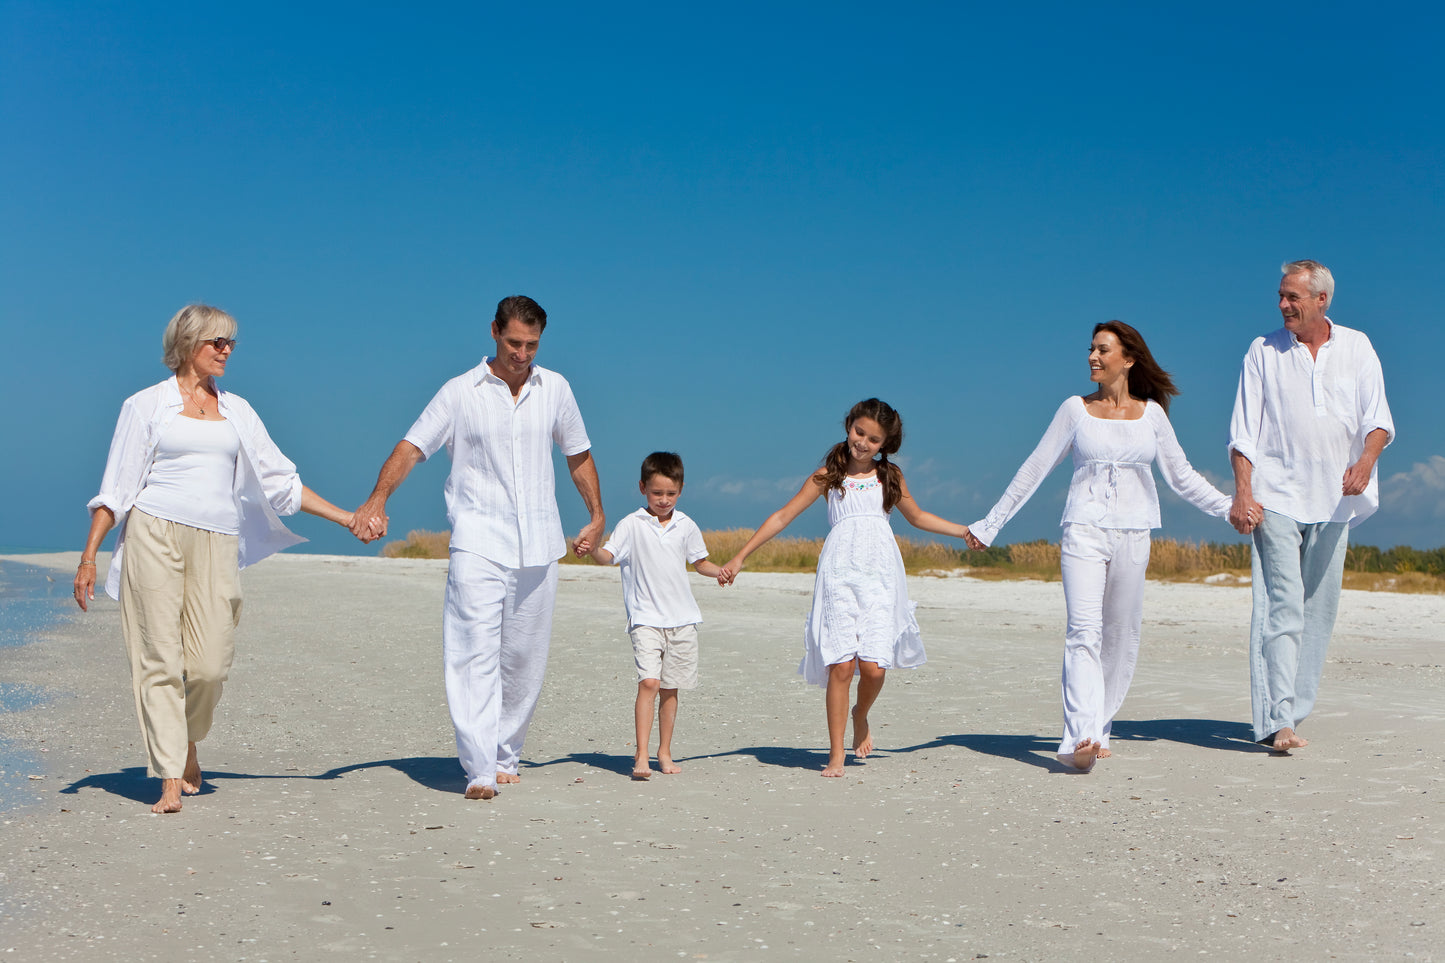 Happy, healthy family of 6, two grand parents, two parents, and their two children walking hand in hand on a white sandy beach